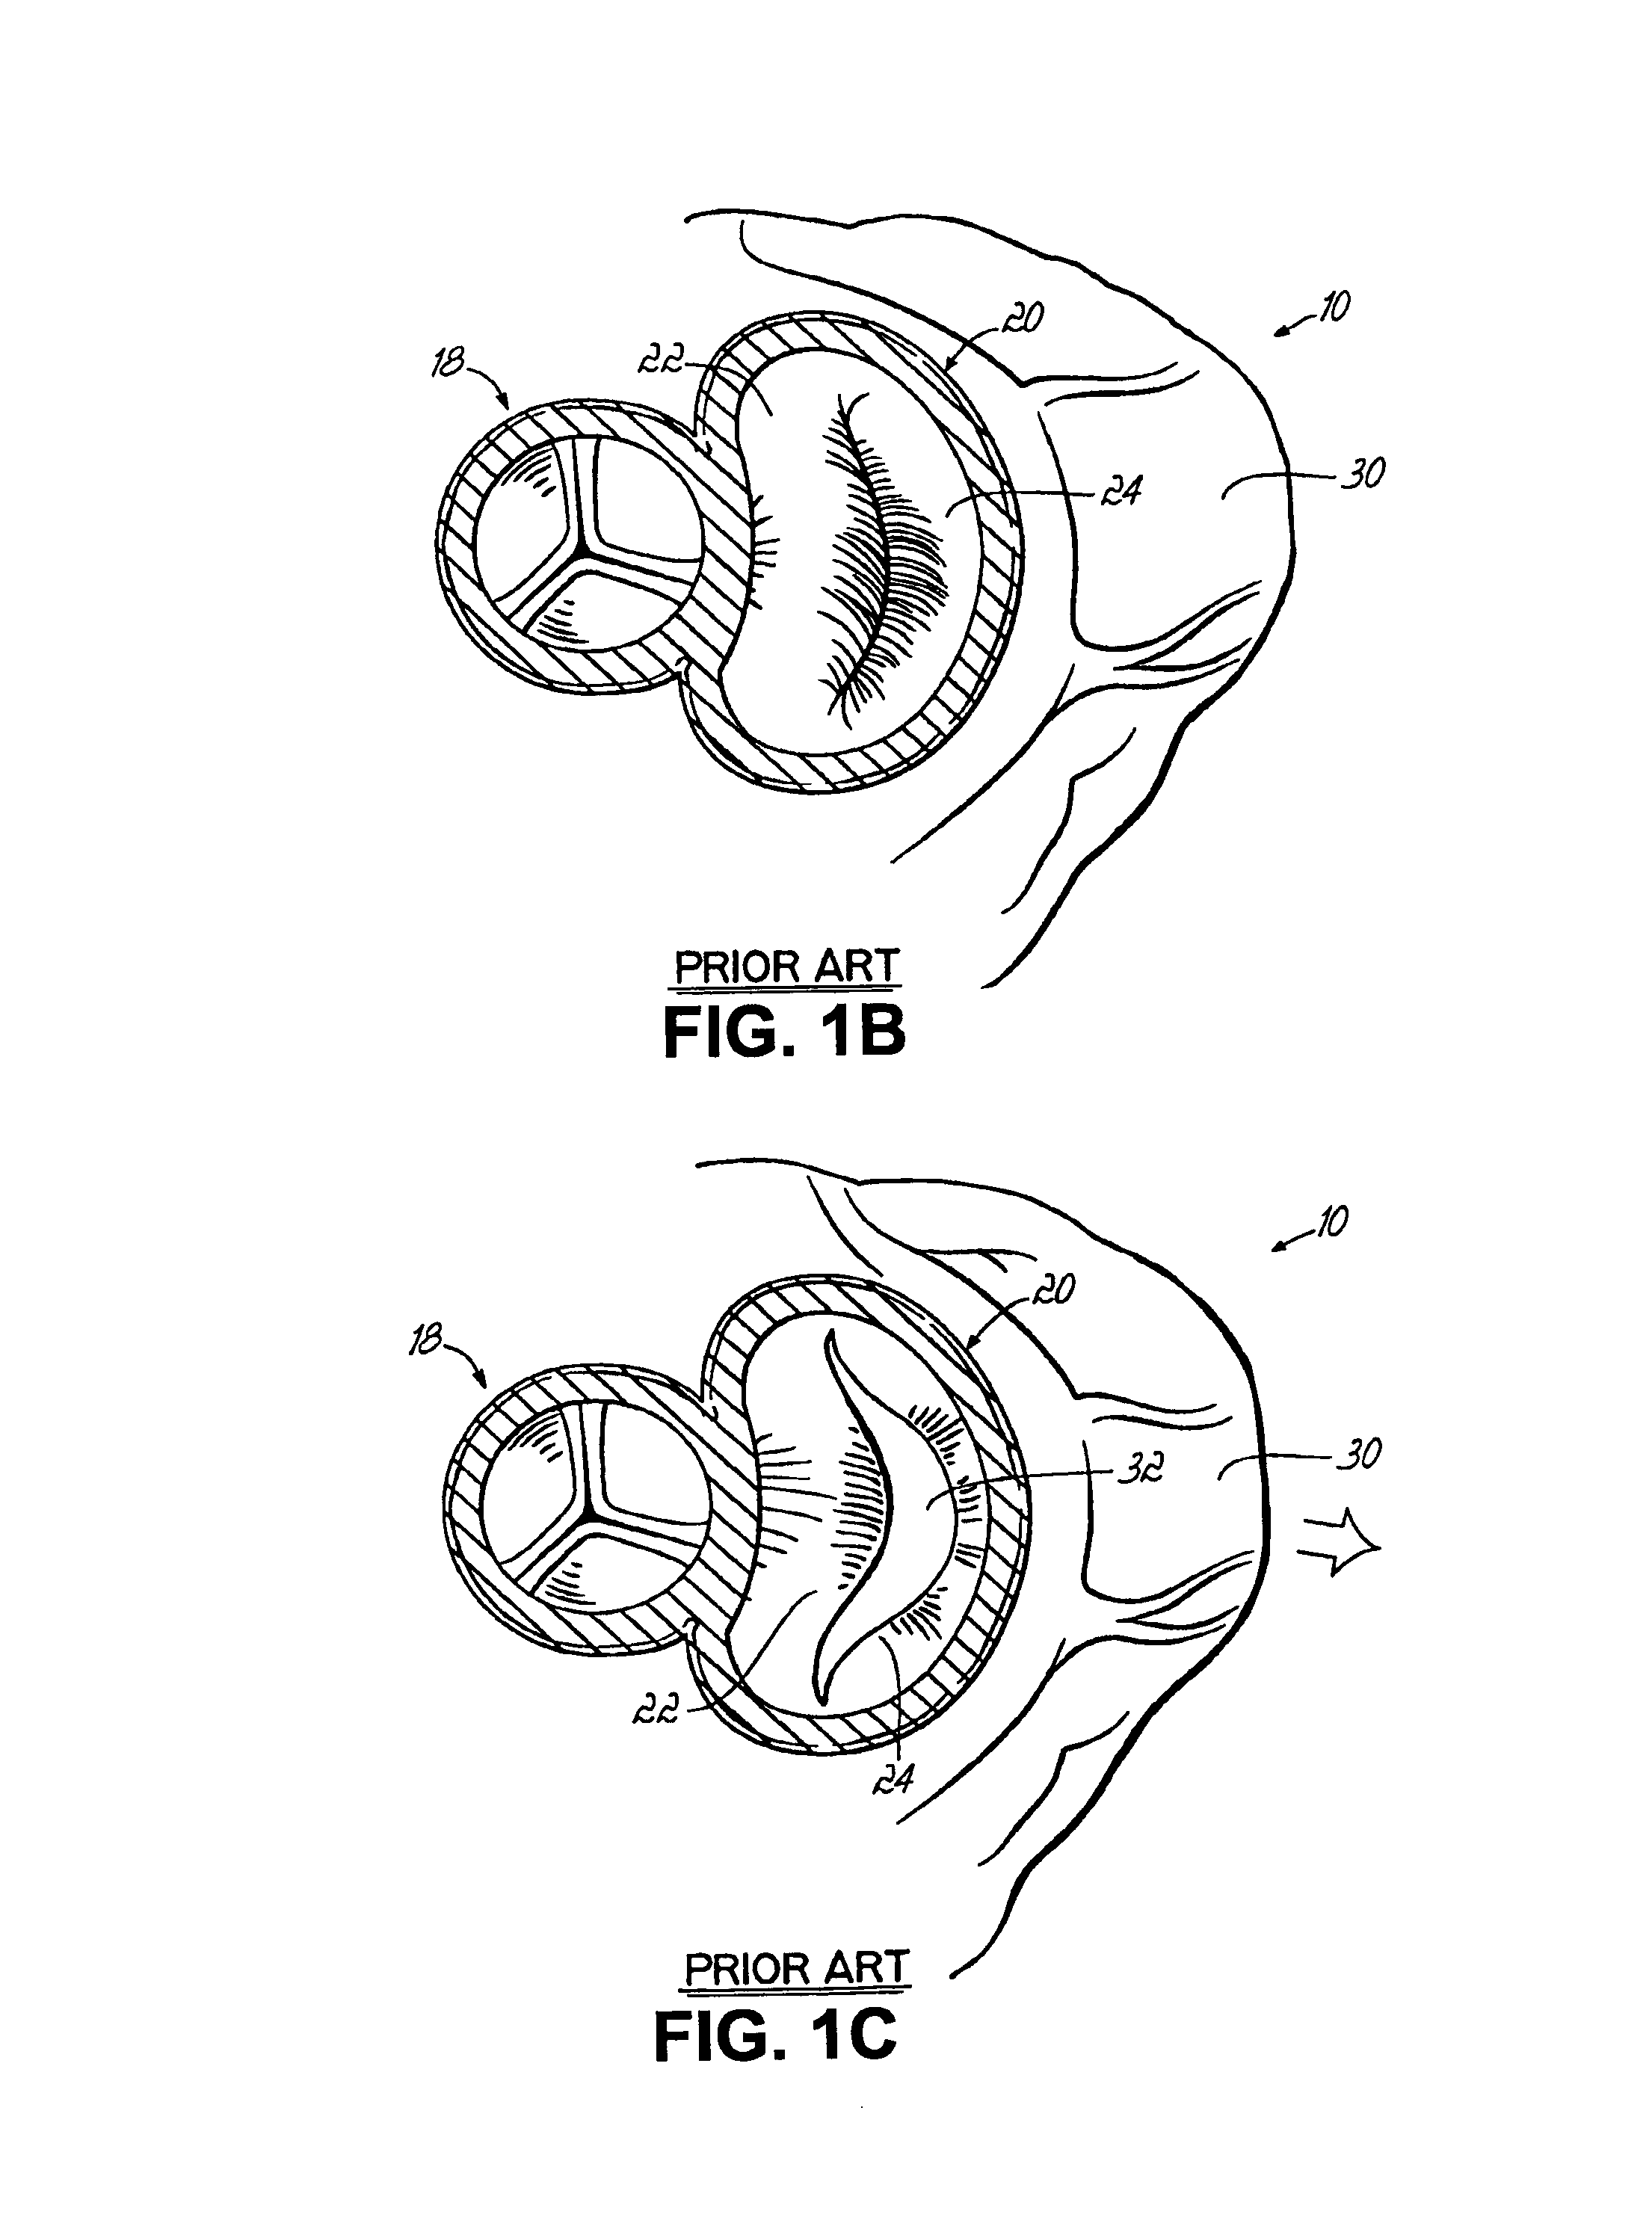 Tissue fastening systems and methods utilizing magnetic guidance